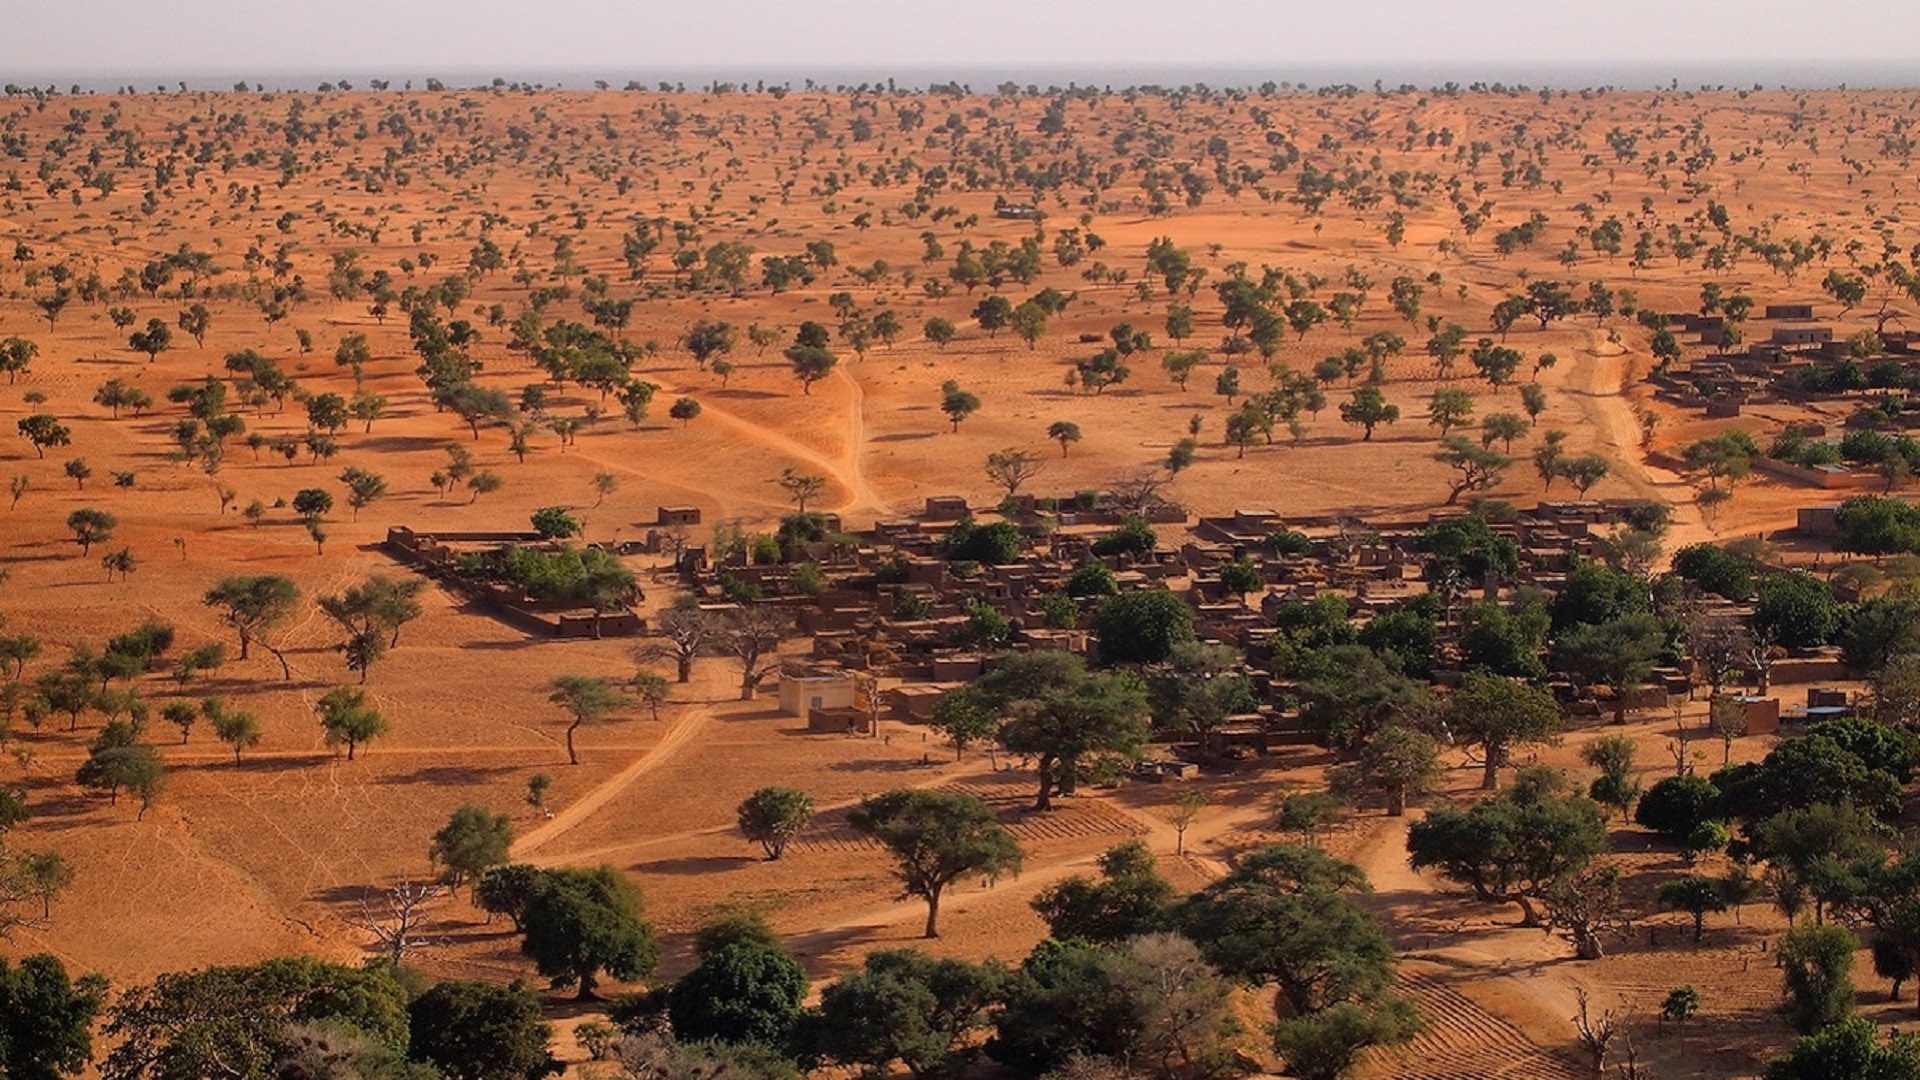 Trees across surrounding a village in a red desert in Mali, Africa